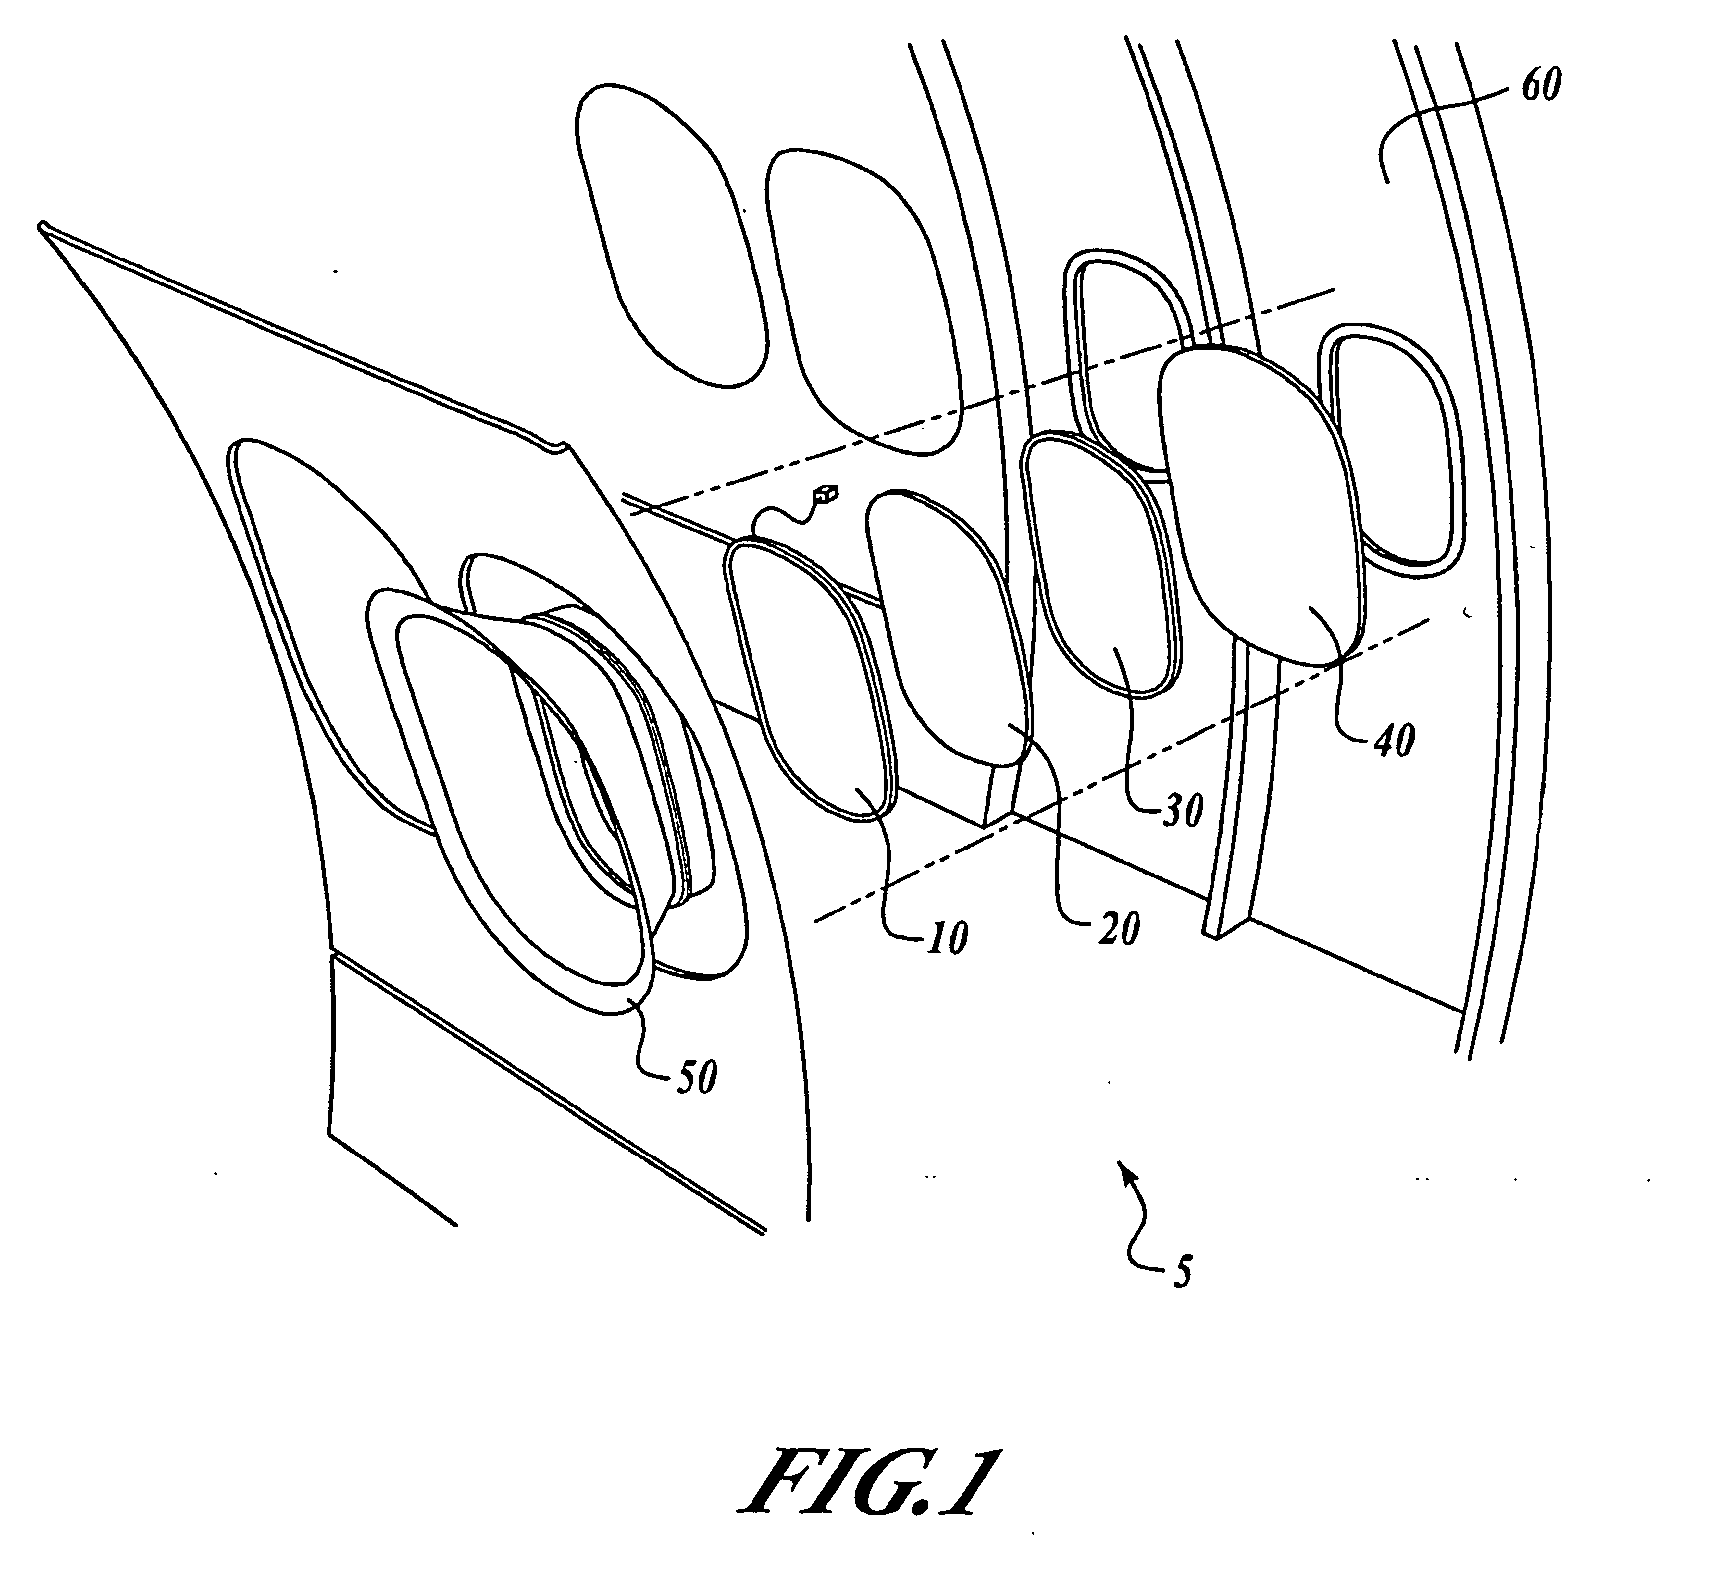 Dimming control system for an array of electrochromic devices